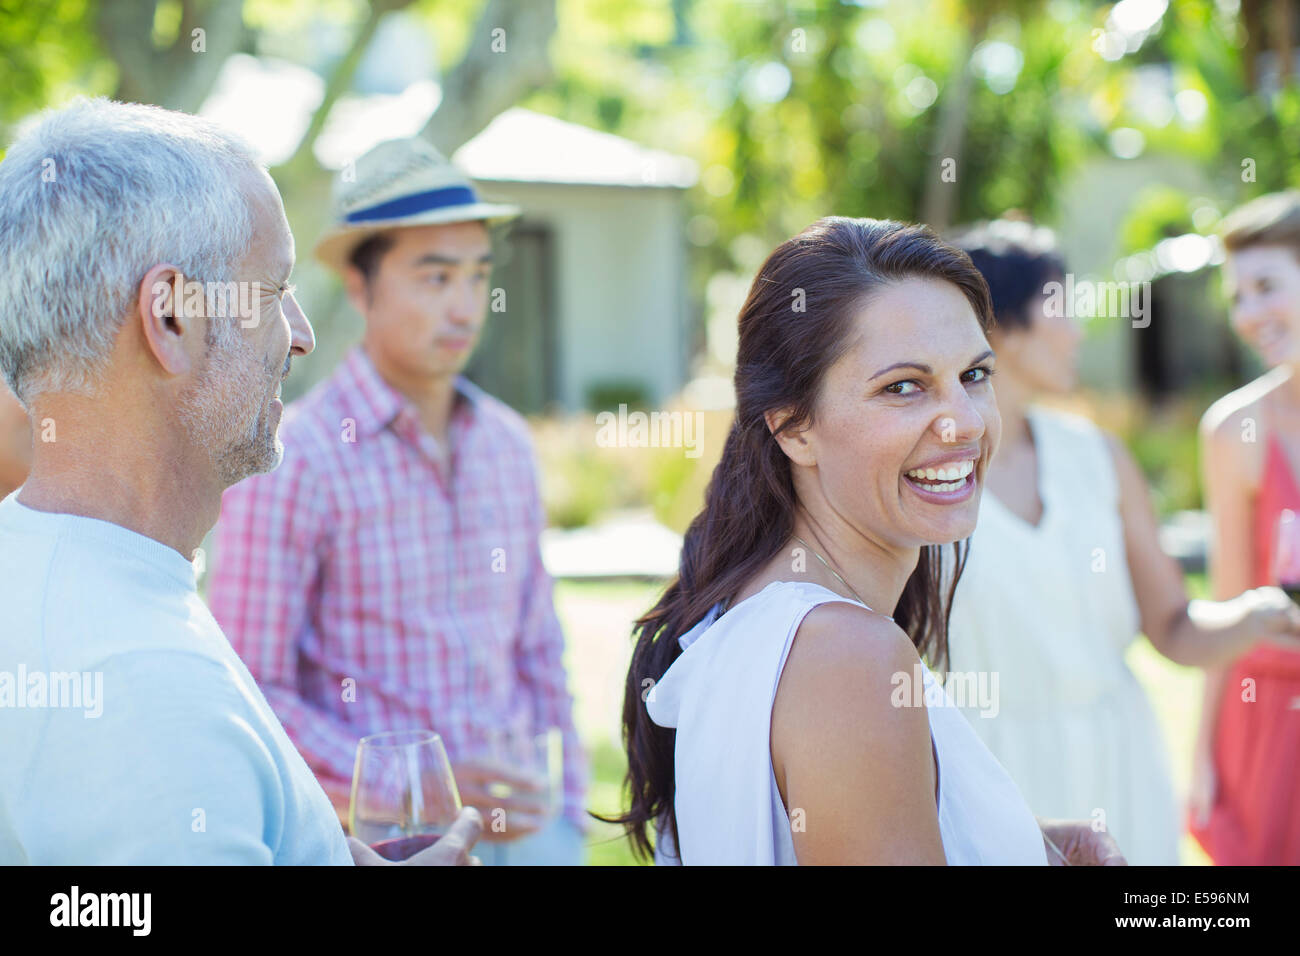 Woman laughing at party Stock Photo